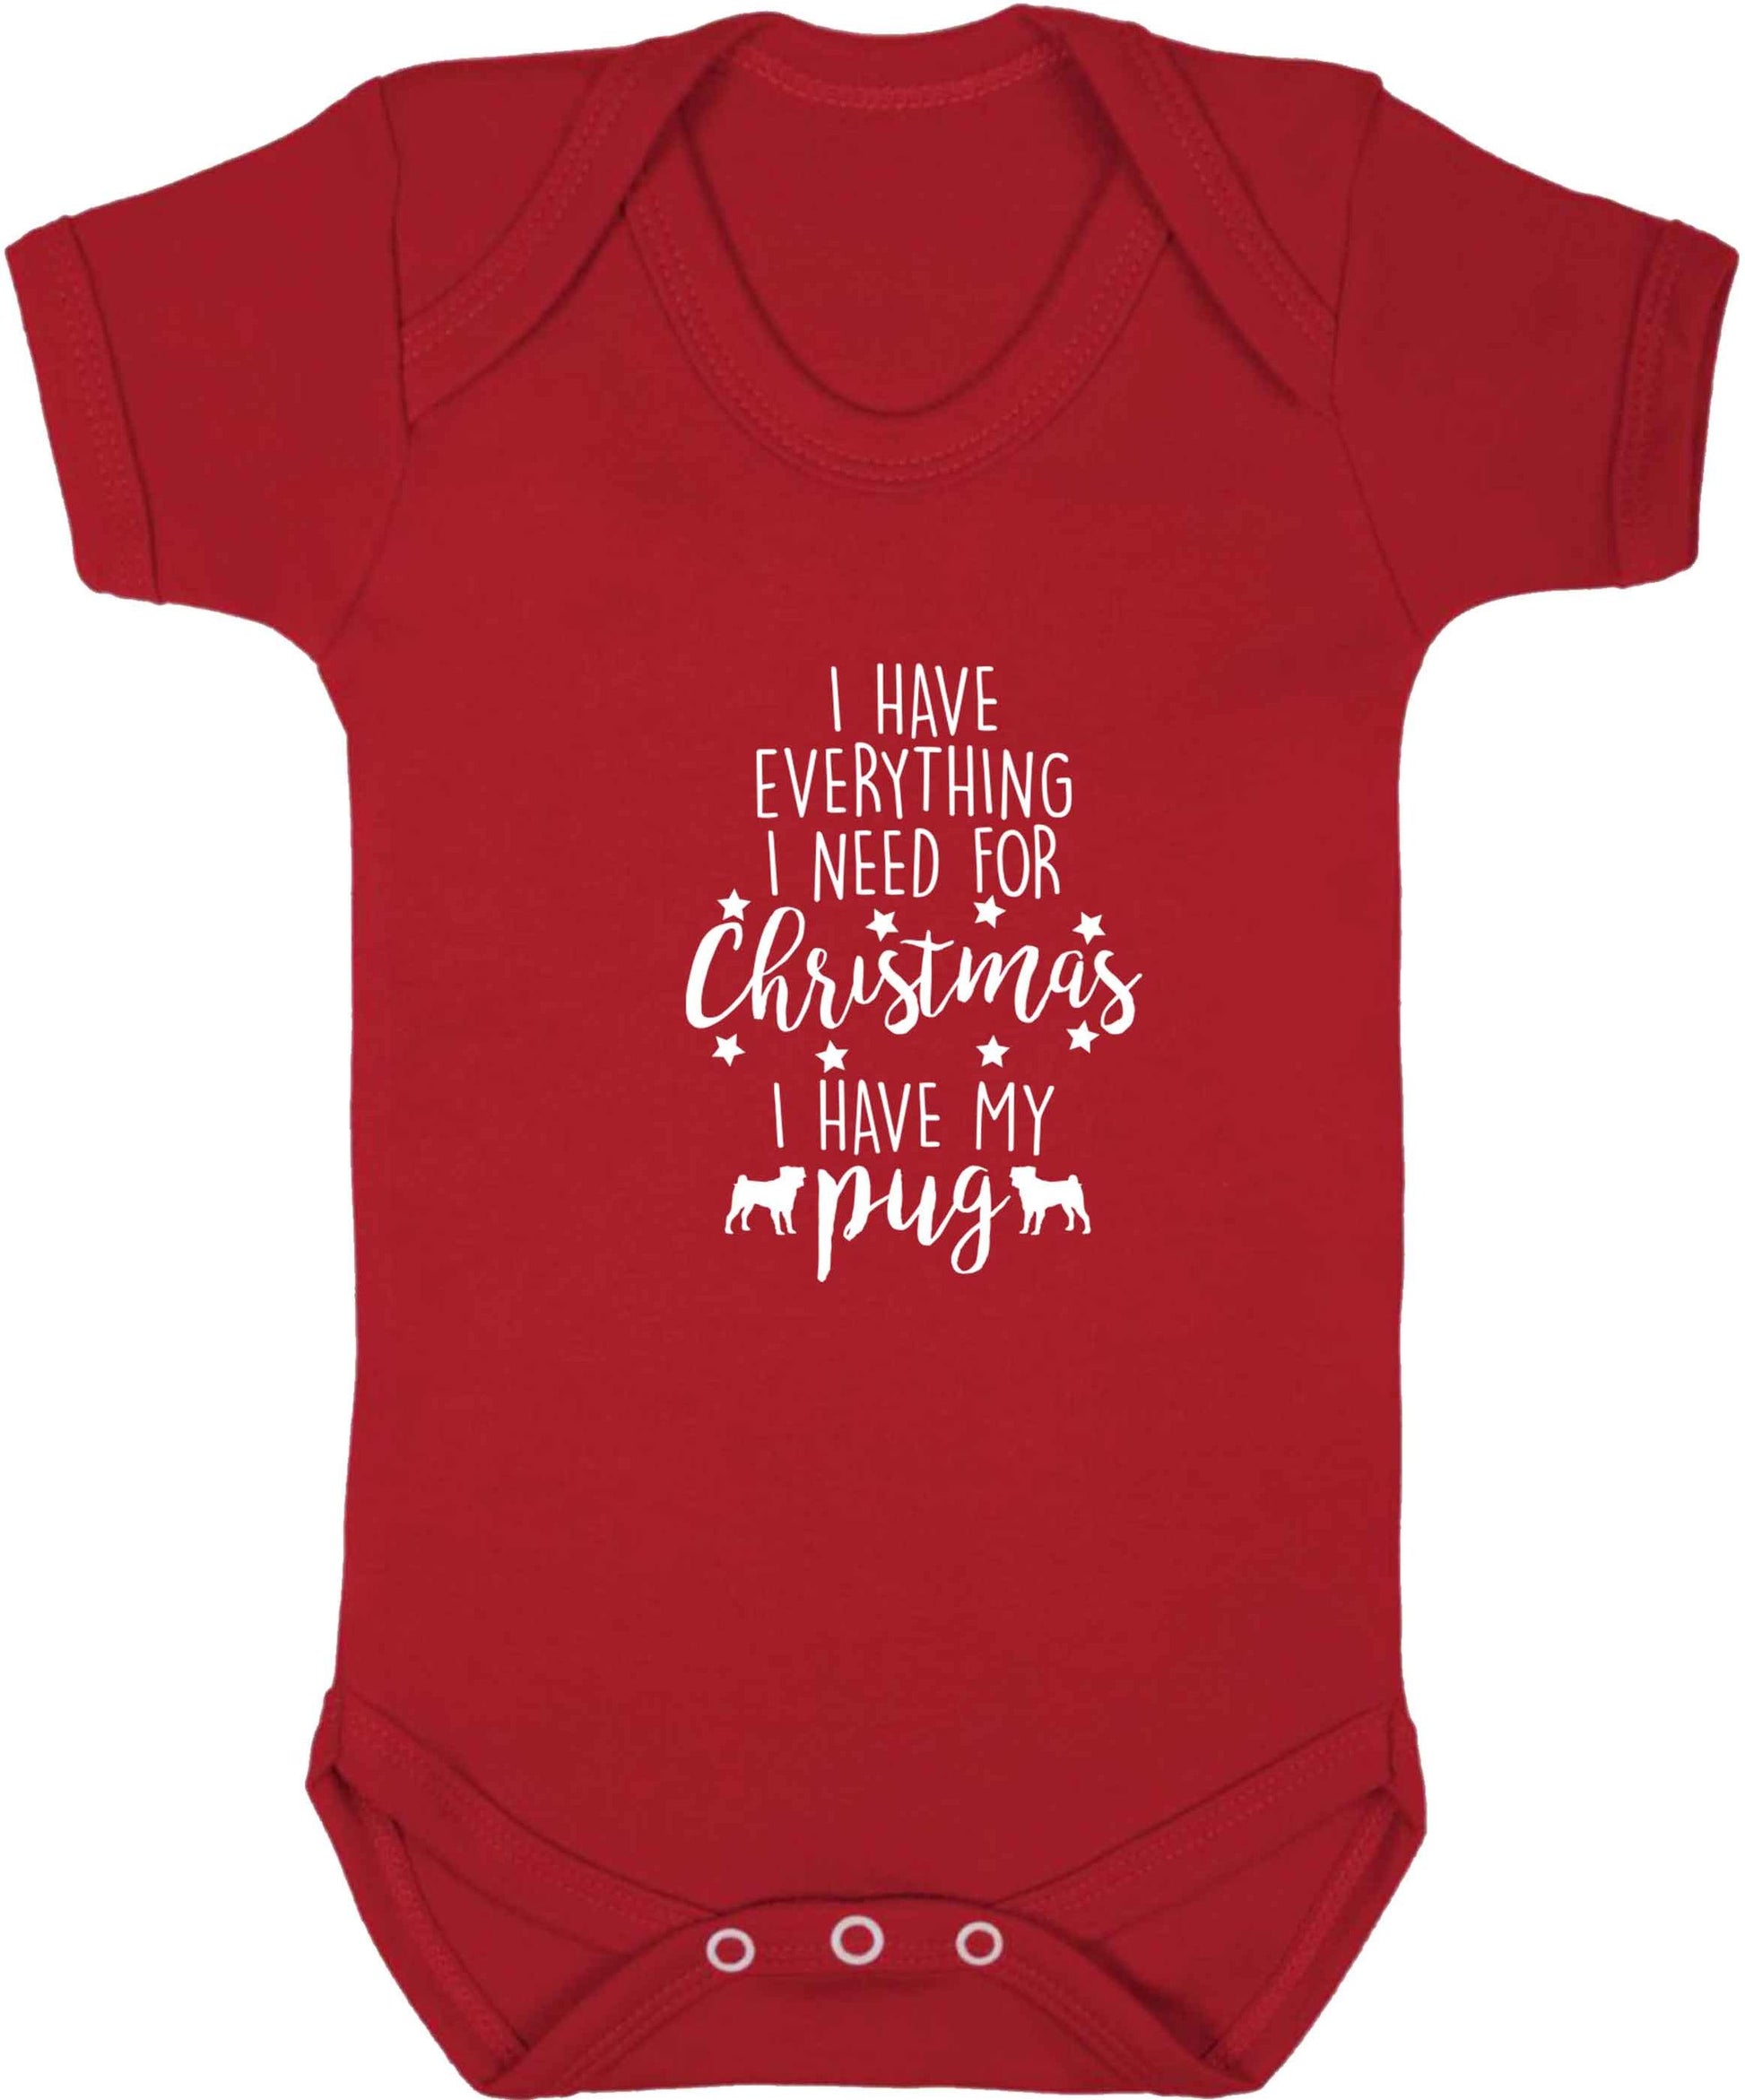 I have everything I need for Christmas I have my pug baby vest red 18-24 months